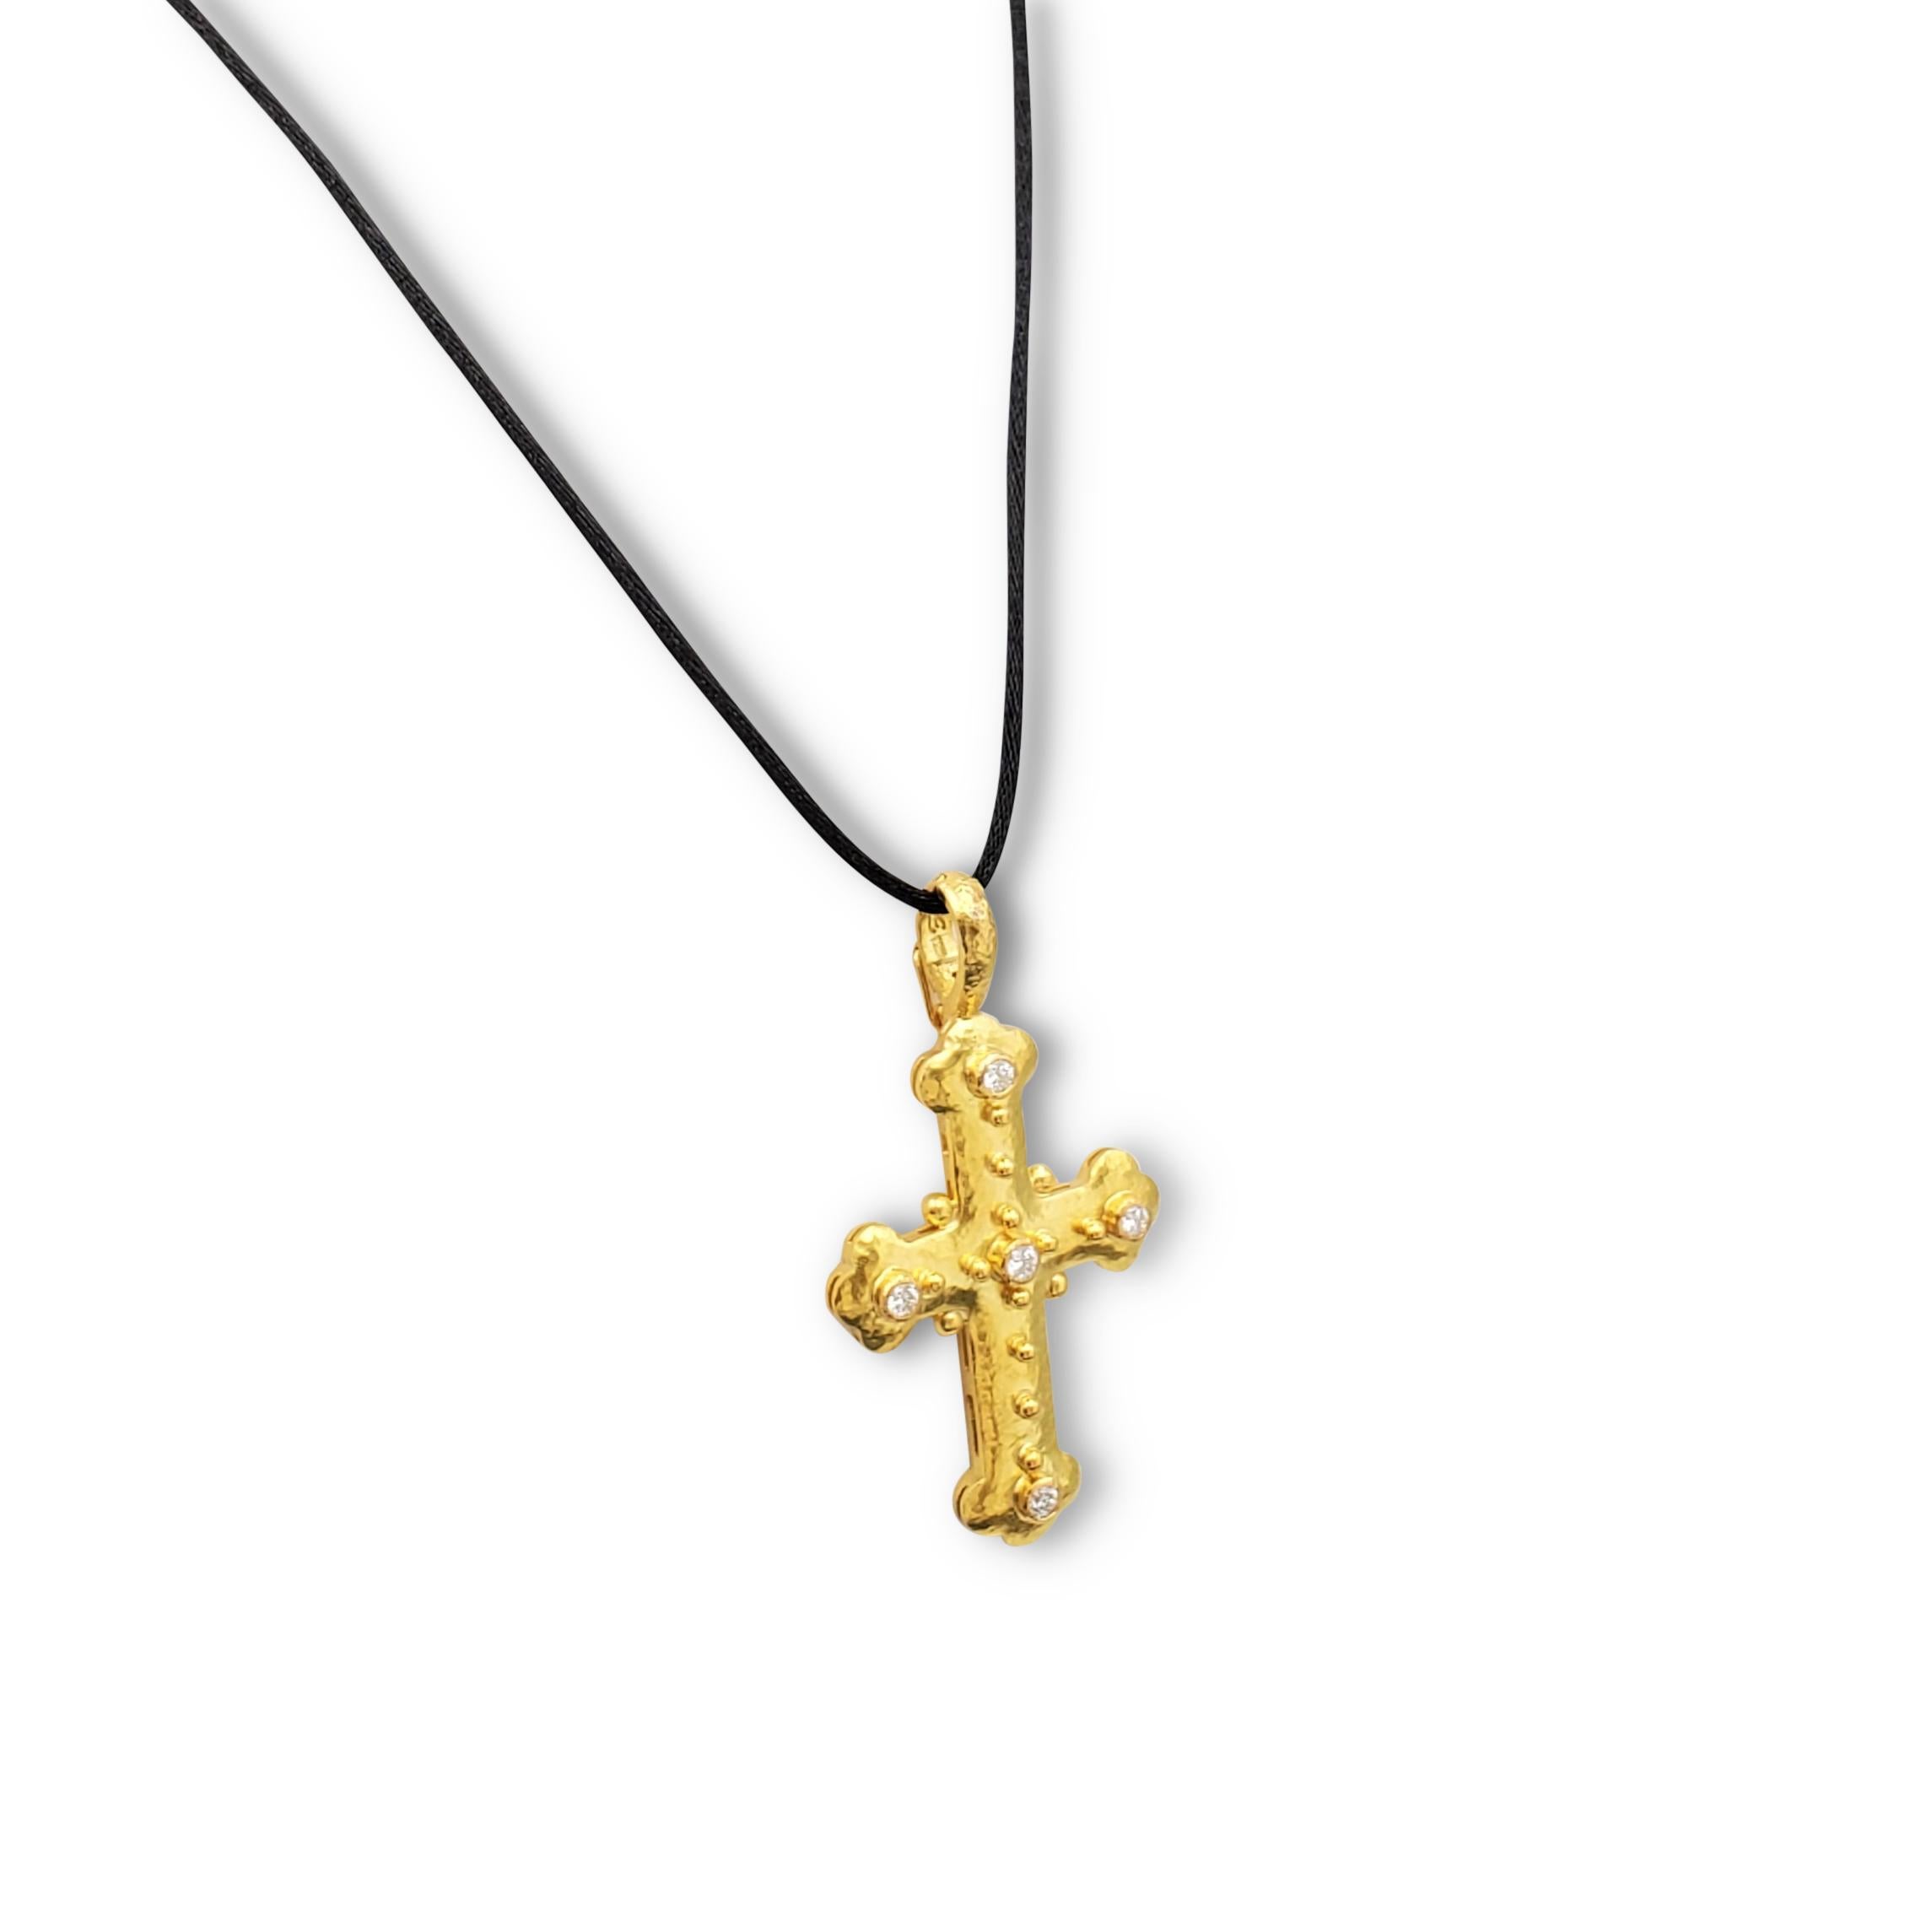 Authentic Elizabeth Locke cross pendant crafted in gleaming 19 karat hammered gold and set with an estimated 0.50 carats of round brilliant cut diamonds (E-F color, VS clarity). Signed EL, 19K. The pendant is suspended from a black silk chain that